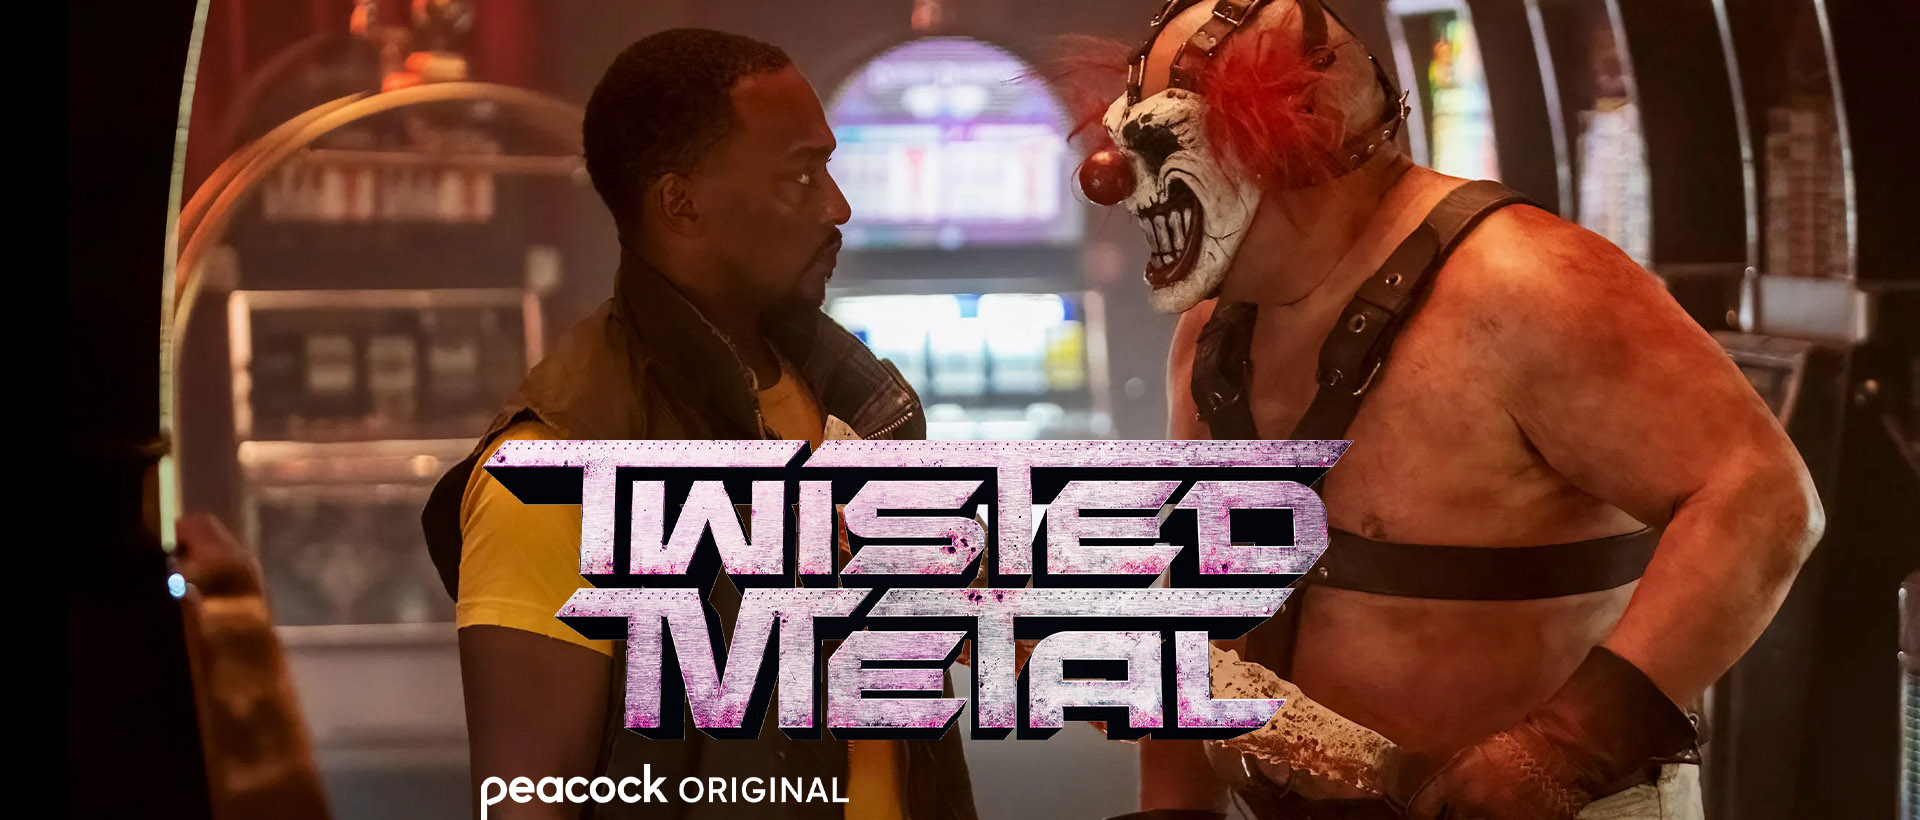 Peacock Renews 'Twisted Metal' For A Second Season - Knight Edge Media